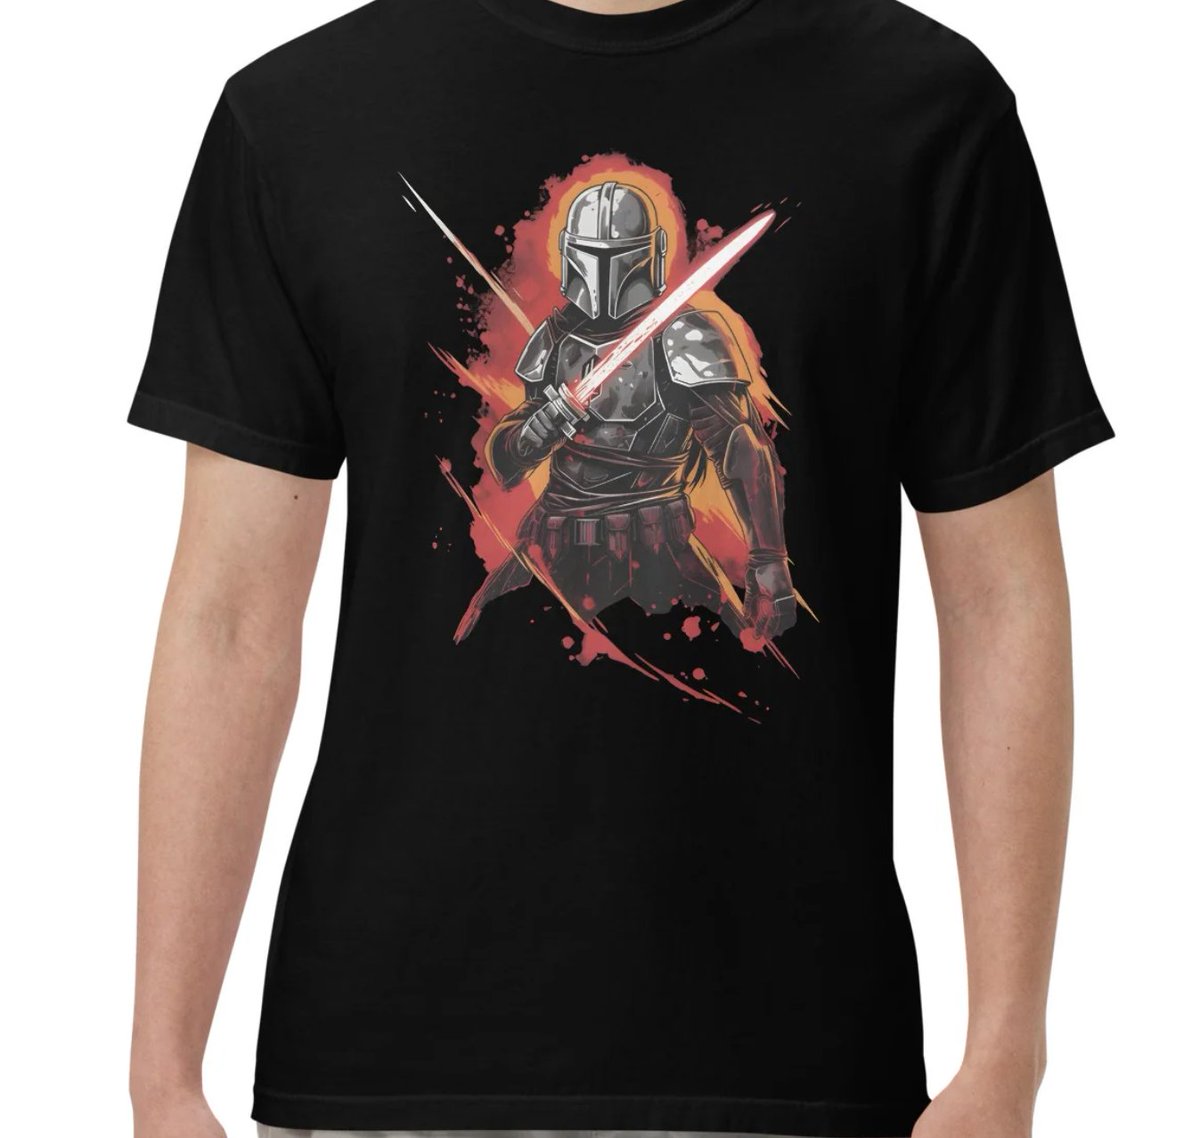 🔥 Show off your love for The Mandalorian with our Din Djarin-inspired design! 💪 Our premium tees are perfect for any fan of the galaxy's most famous bounty hunter. 😎 Get yours now at Galactic Fandoms! #TheMandalorian #DinDjarin #FandomFashion Galacticfandoms.com